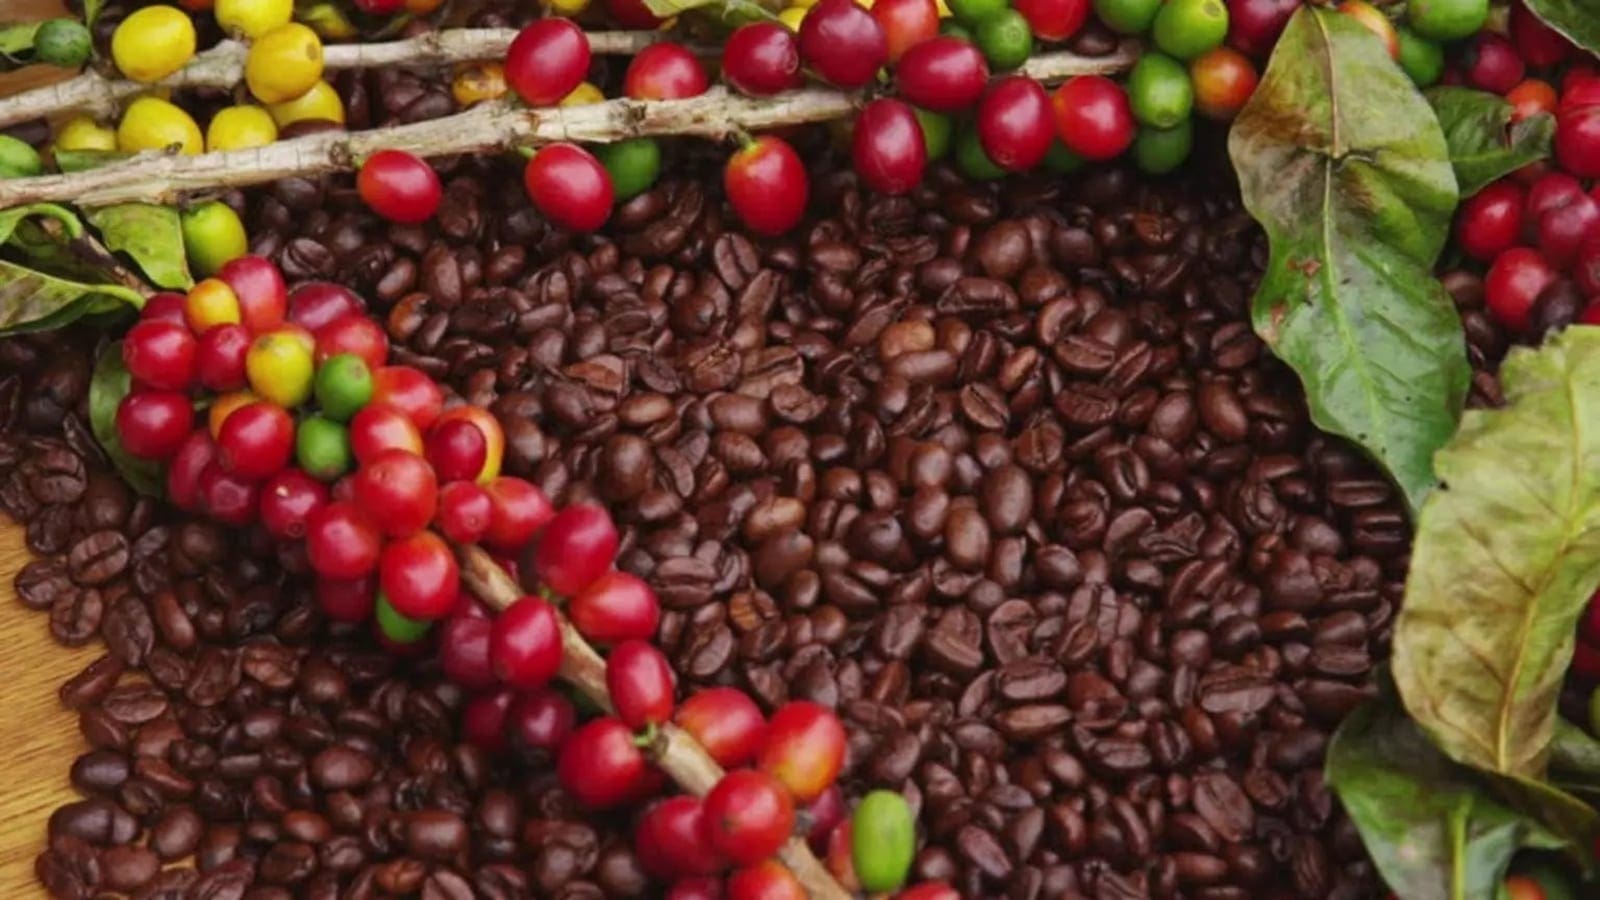 Coffee production in South America, Asia drops as unfavorable conditions reign supreme